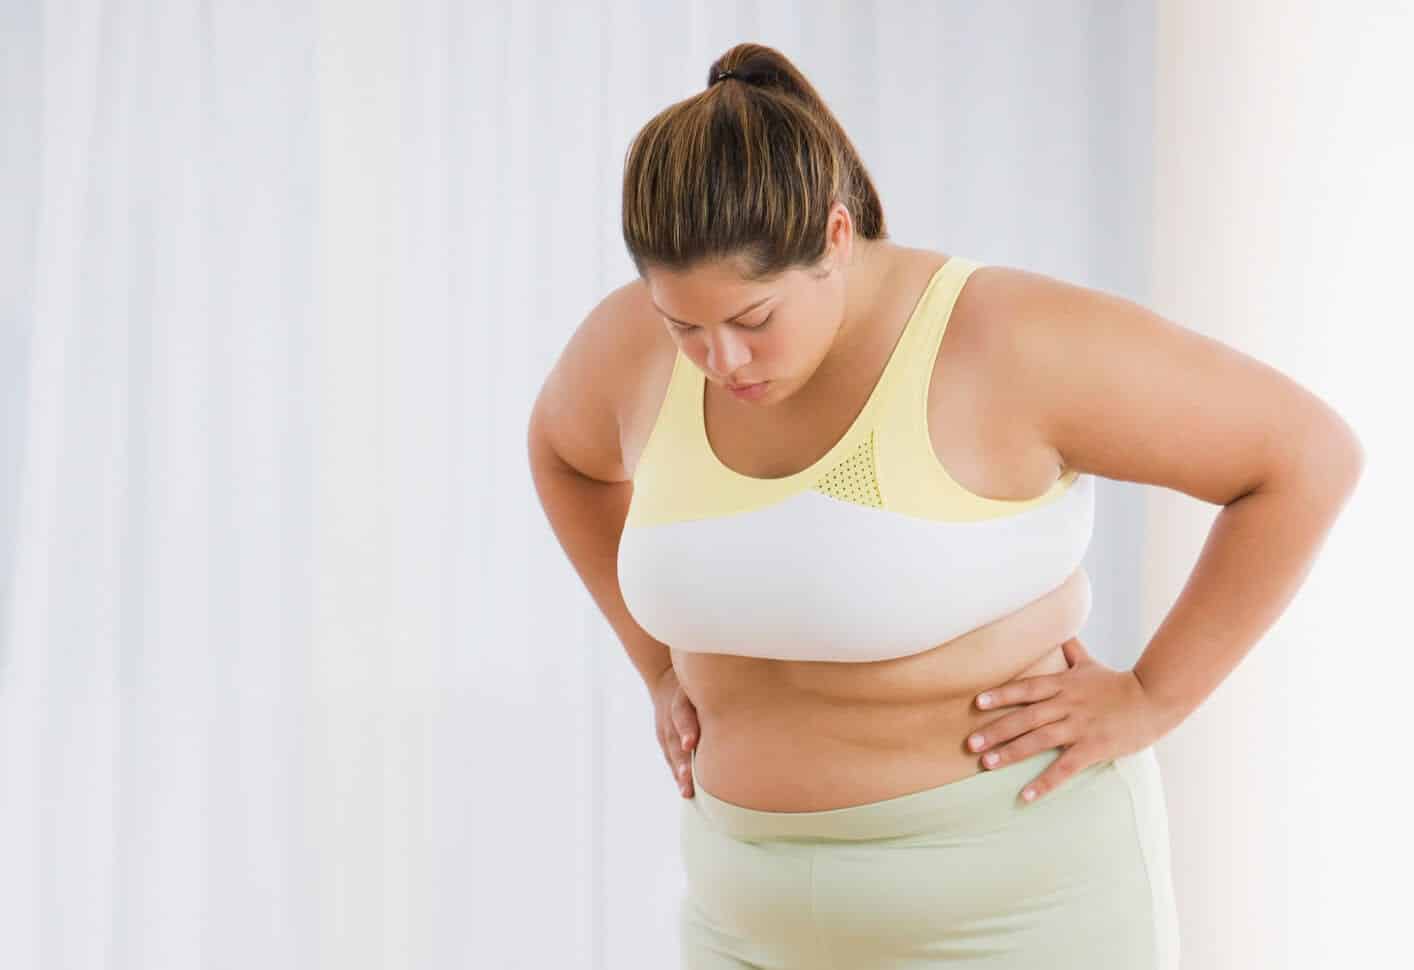 Gastroplasty - Discover the most modern form of bariatric surgery